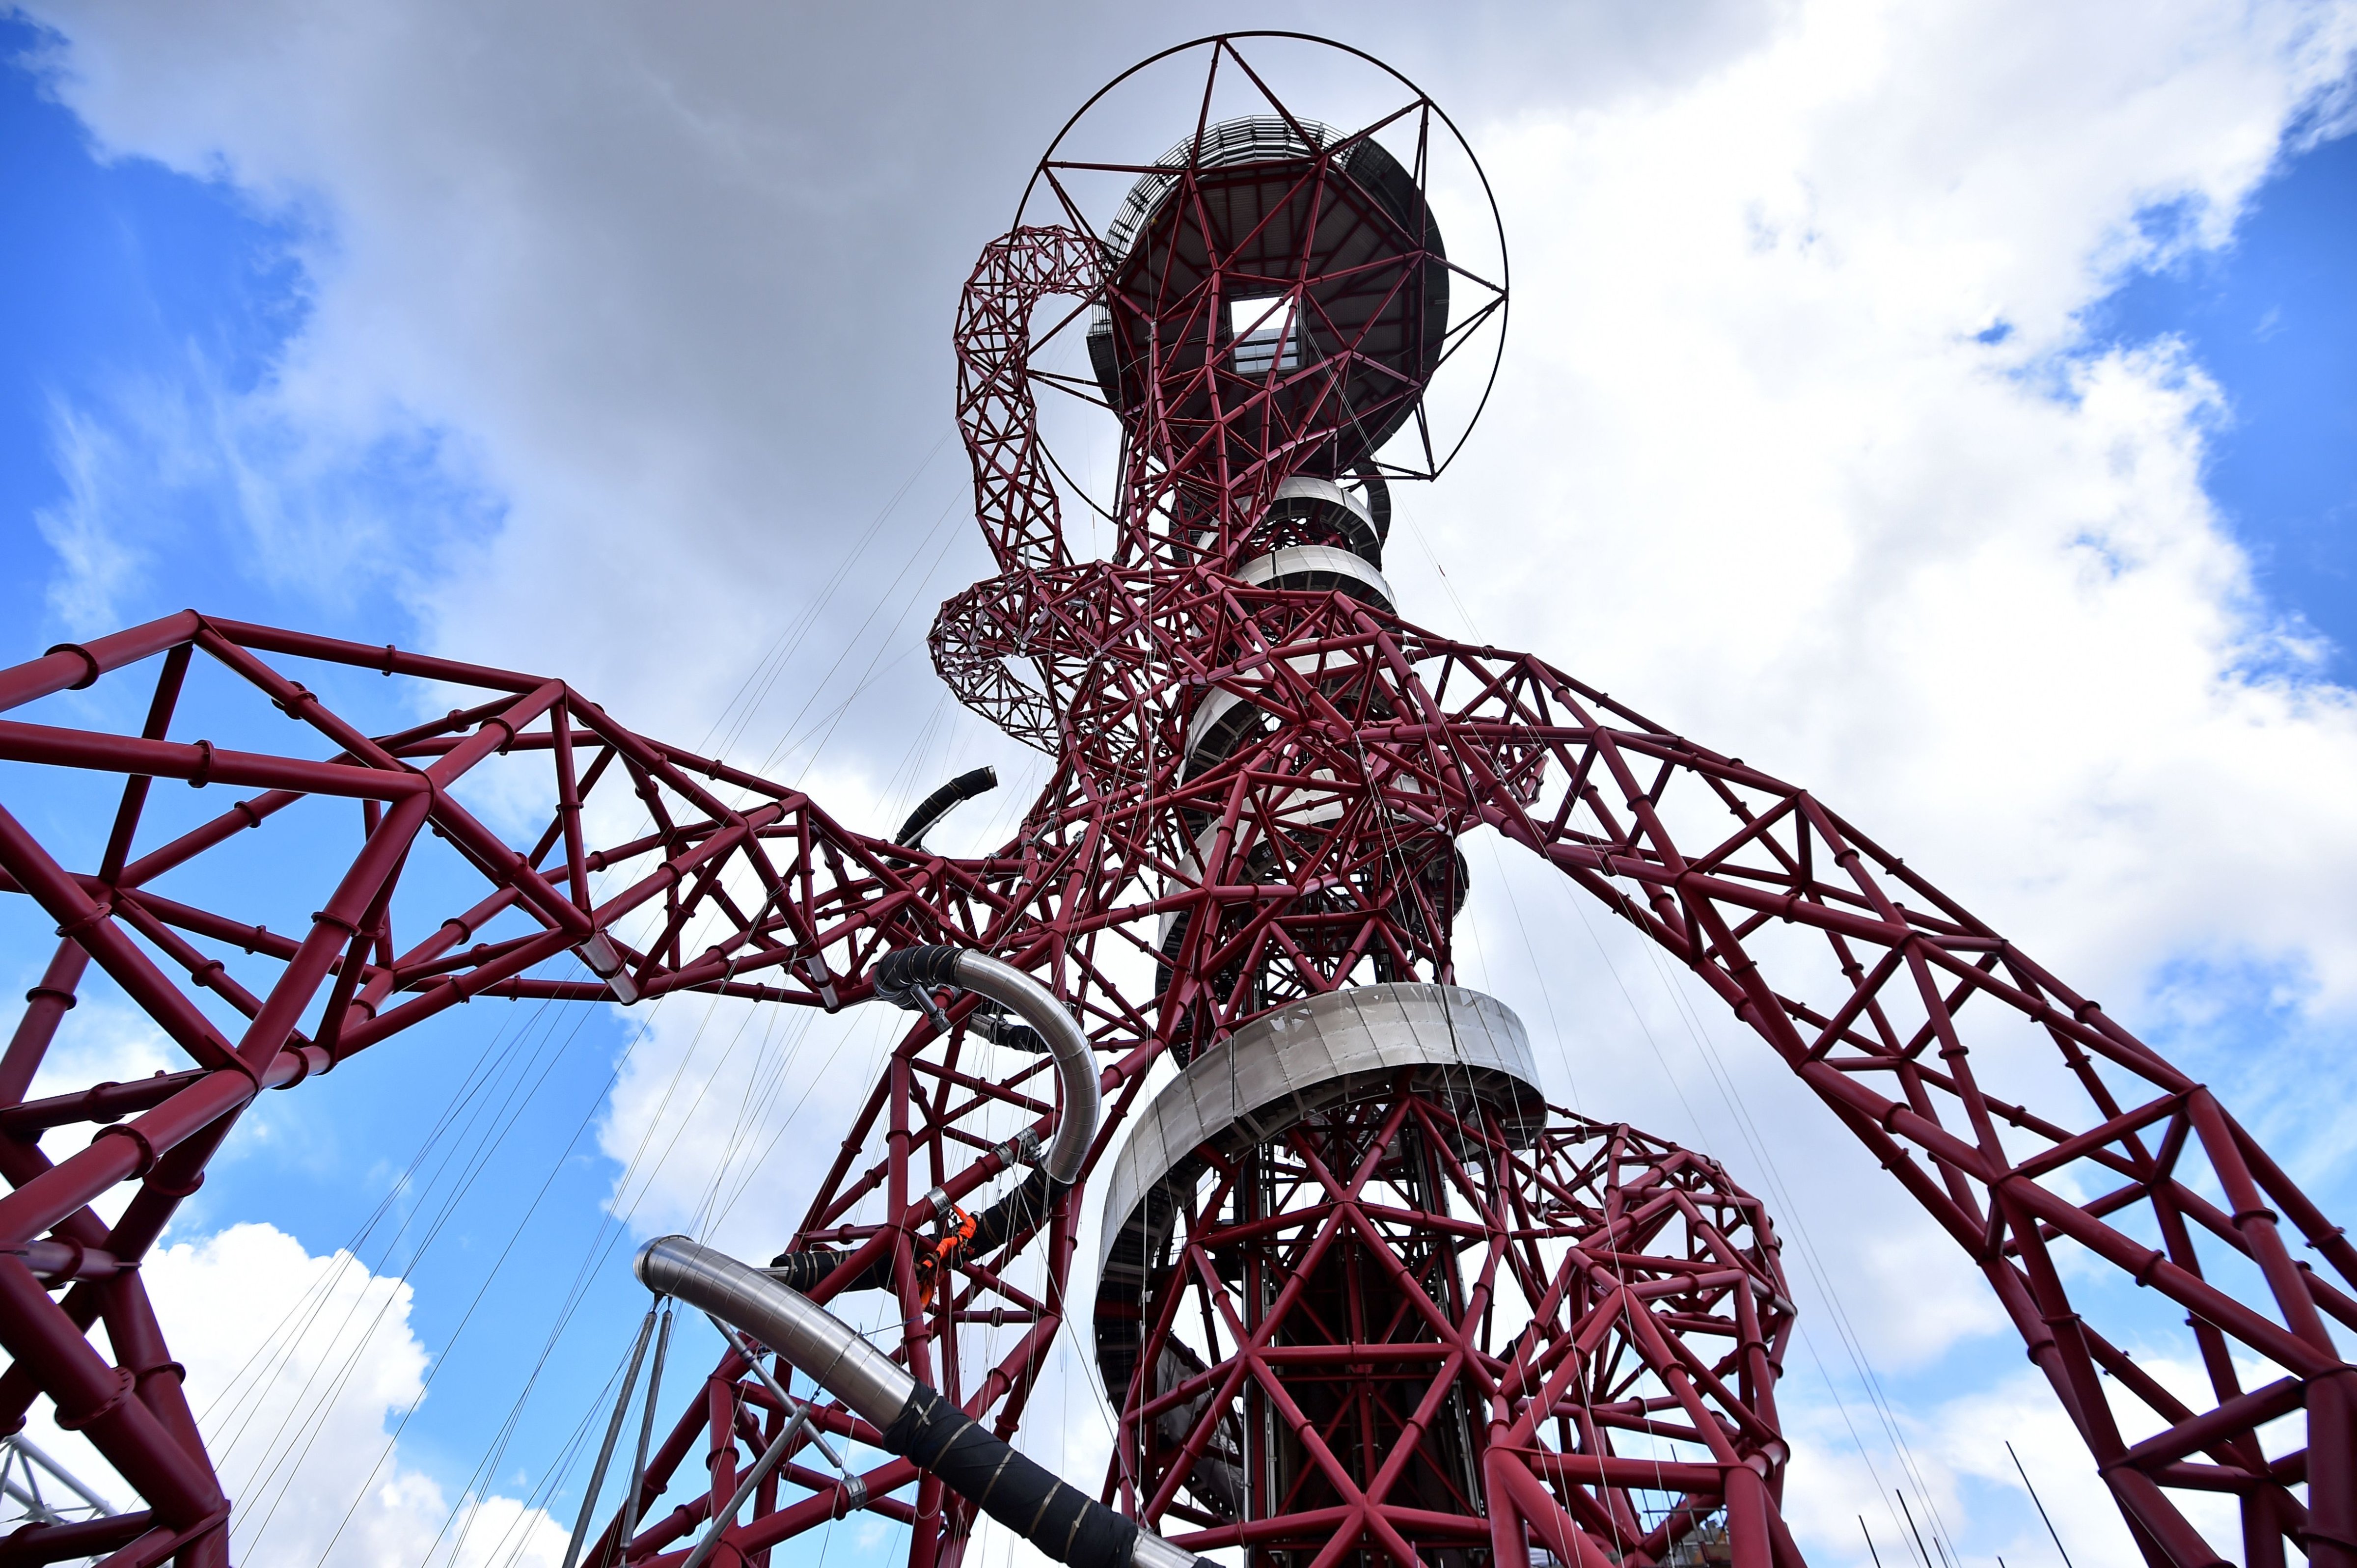 'The Slide,' designed by Belgian artist Carsten Holler for the ArcelorMittal Orbit in east London. Pictured here under construction on April 26, 2016. (Ben Stansall—AFP/Getty Images)